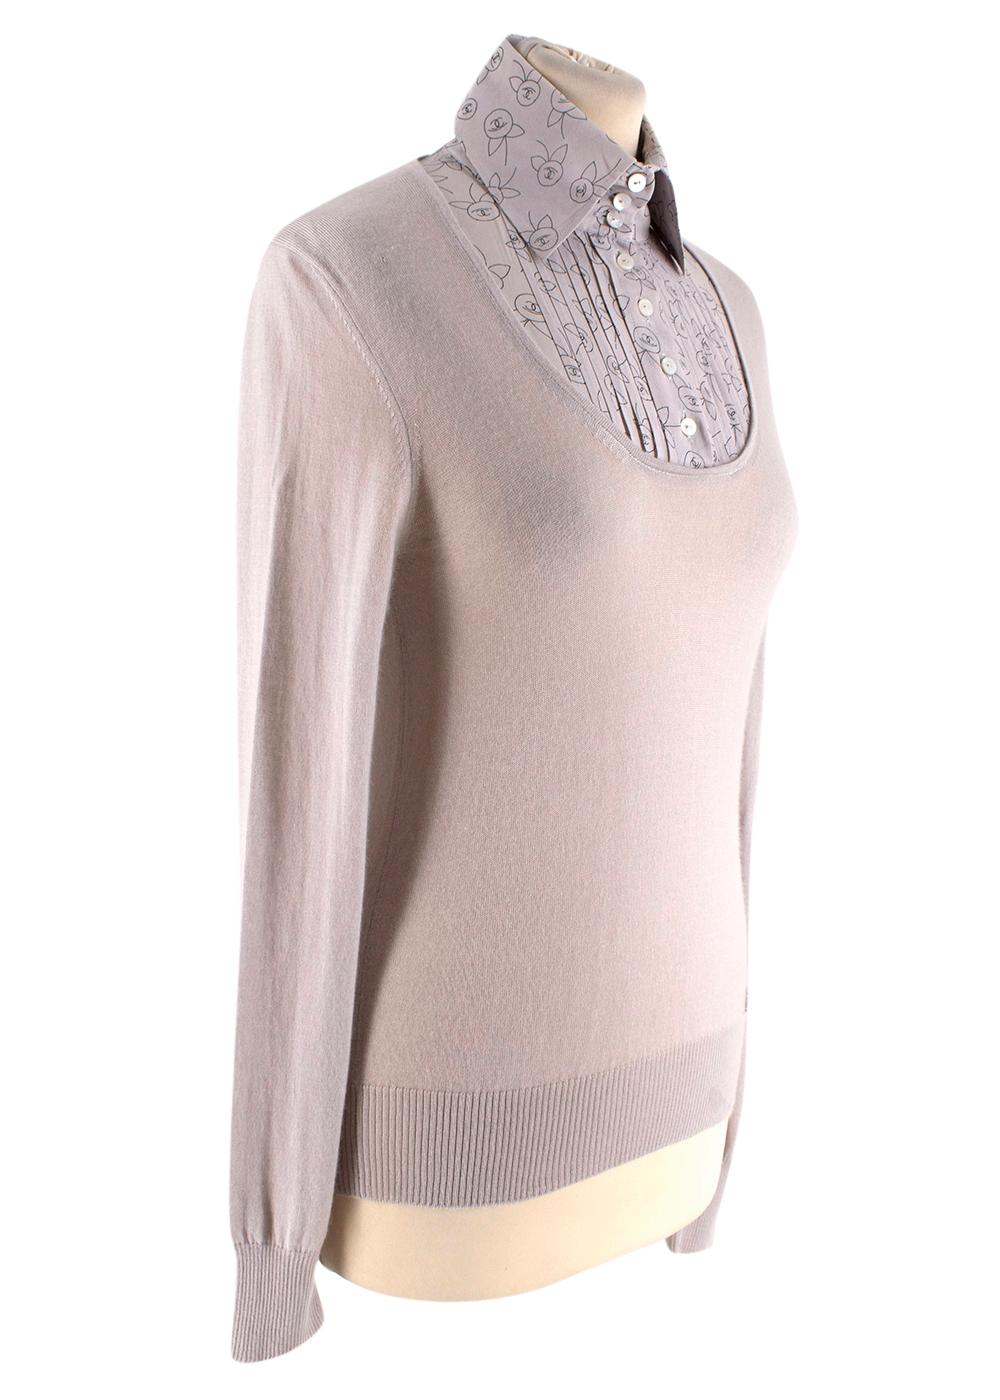 Chanel Taupe Collared Cashmere Blend Jumper

- Chanel logo printed shirt pannel 
- Regular collar 
- Button-up fastening 
- Soft cashmere/silk blend handling 
- Sewn logo detailing
- Ribbed sleeves and hemline

Materials 
Outer - 70% cashmere, 30%